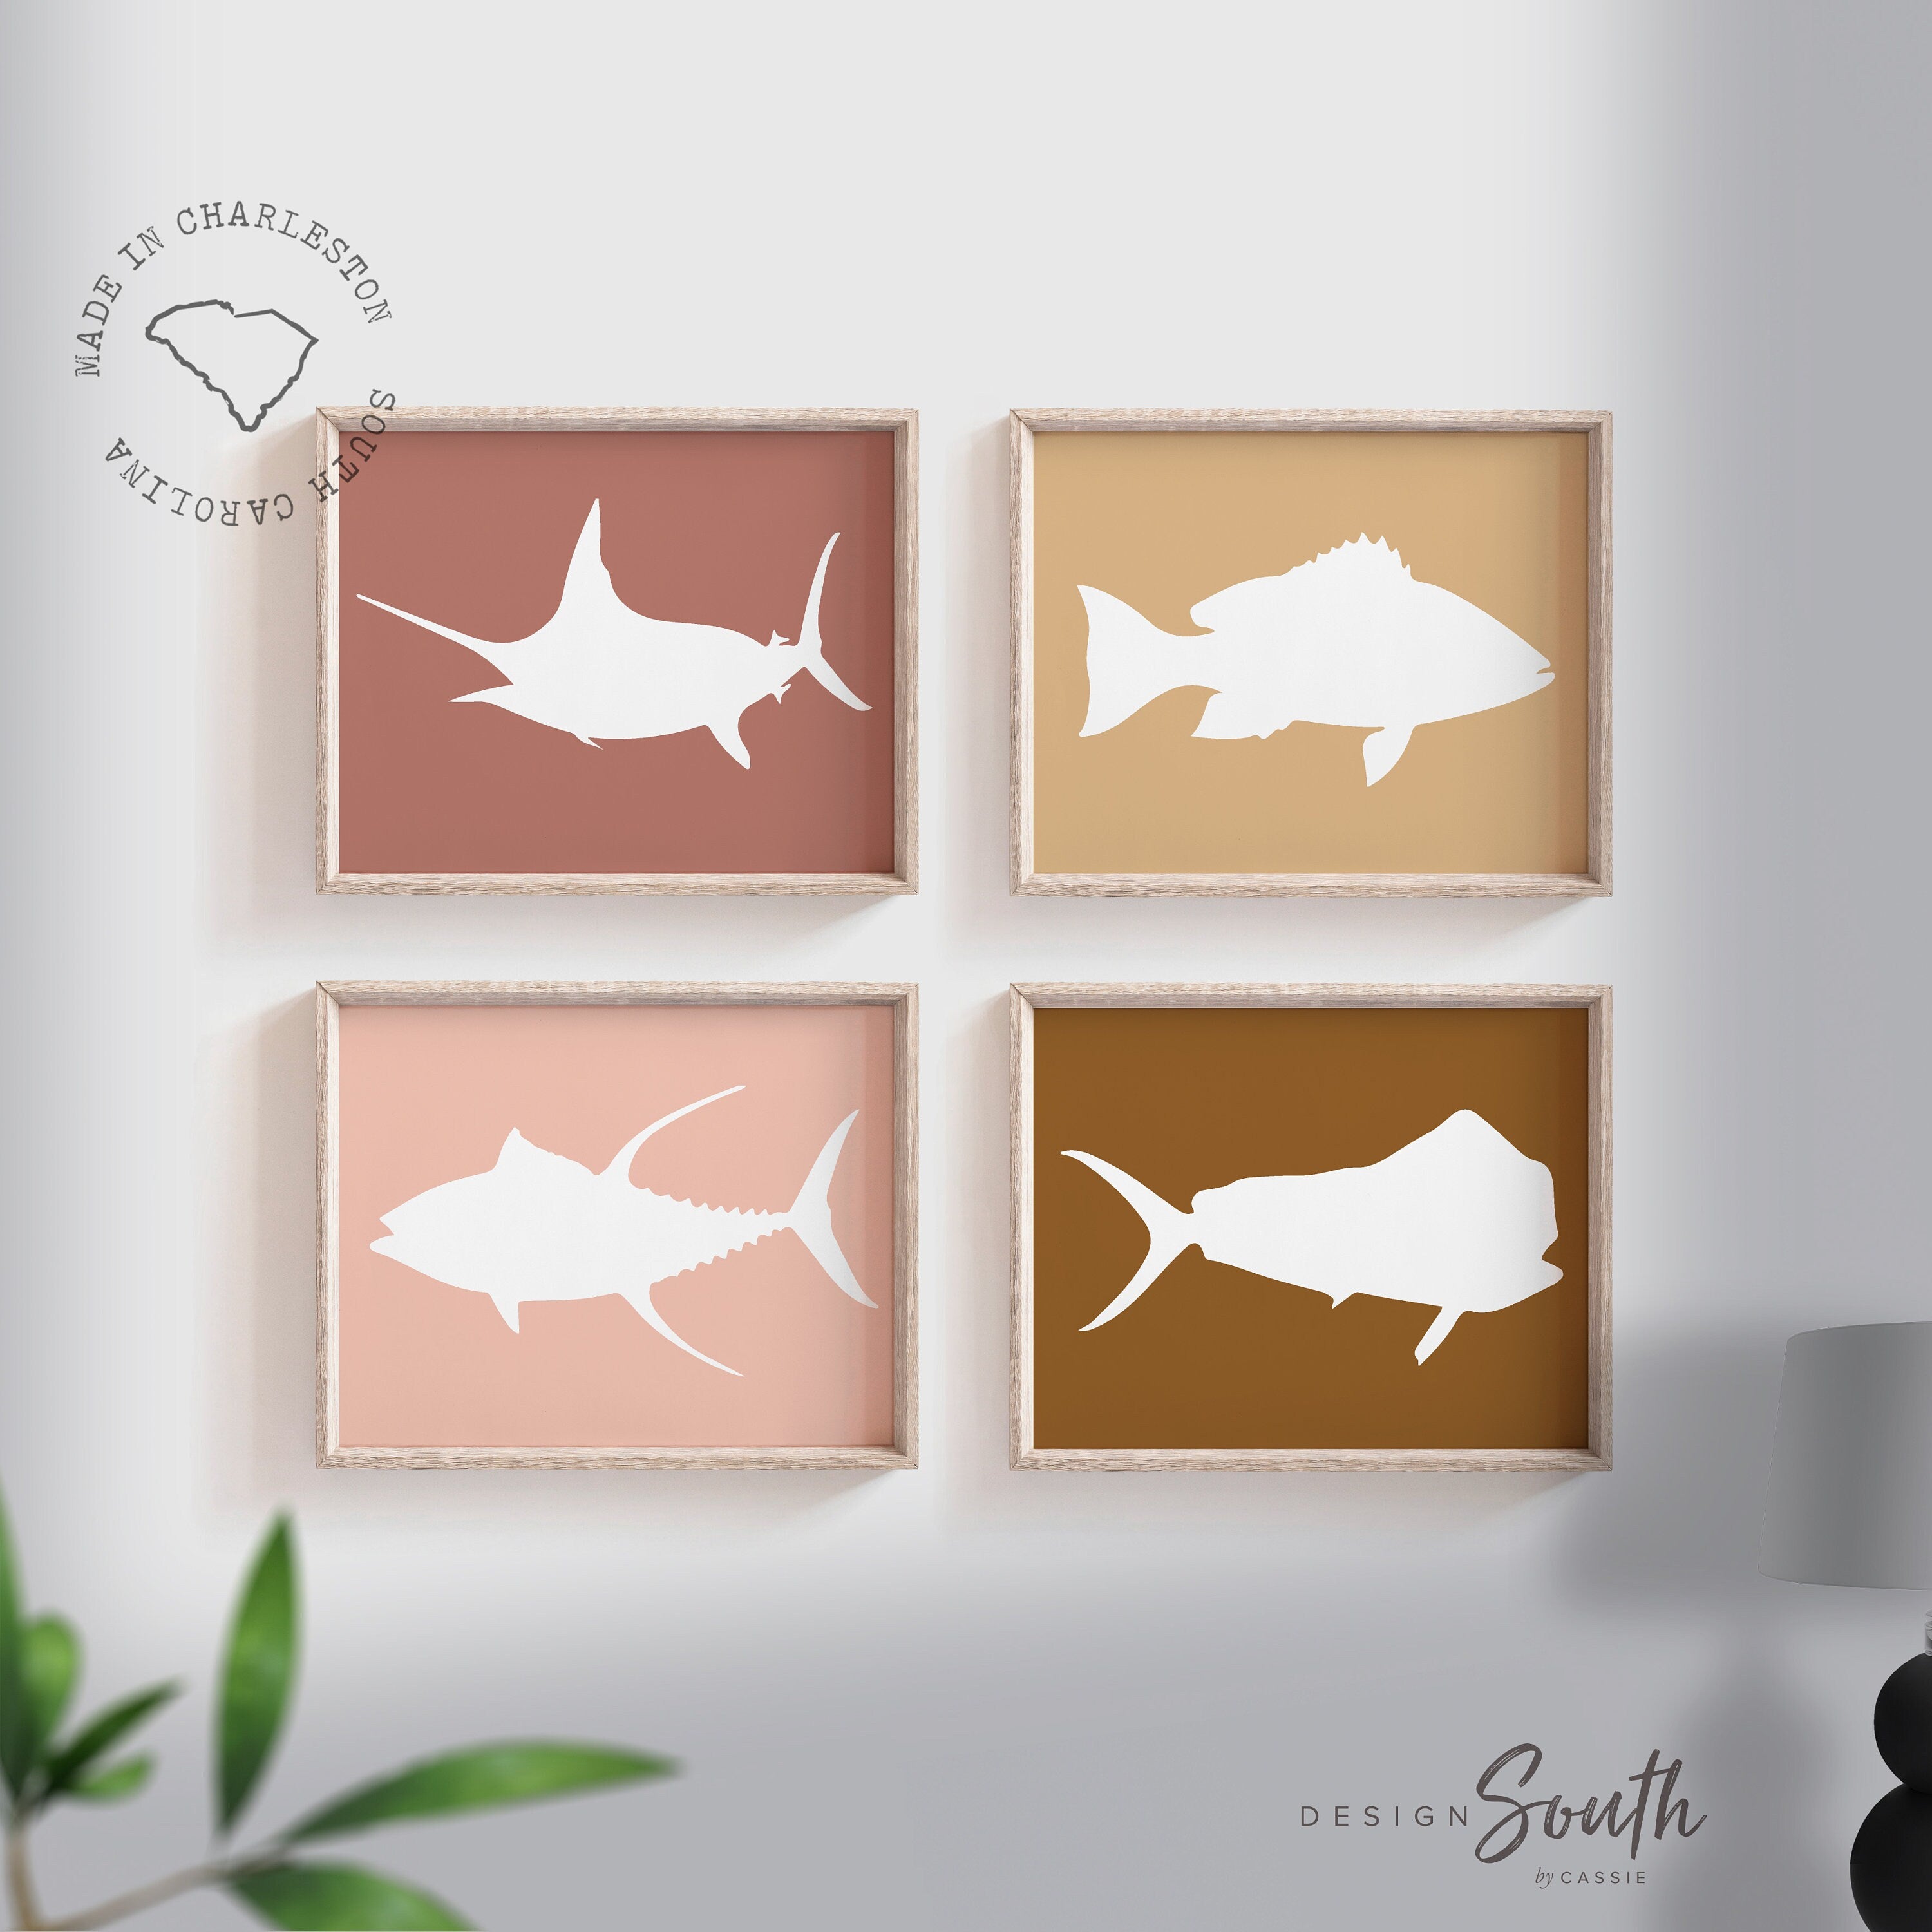 Offshore fishing, offshore fish, boys saltwater fish wall art, marlin –  Design South